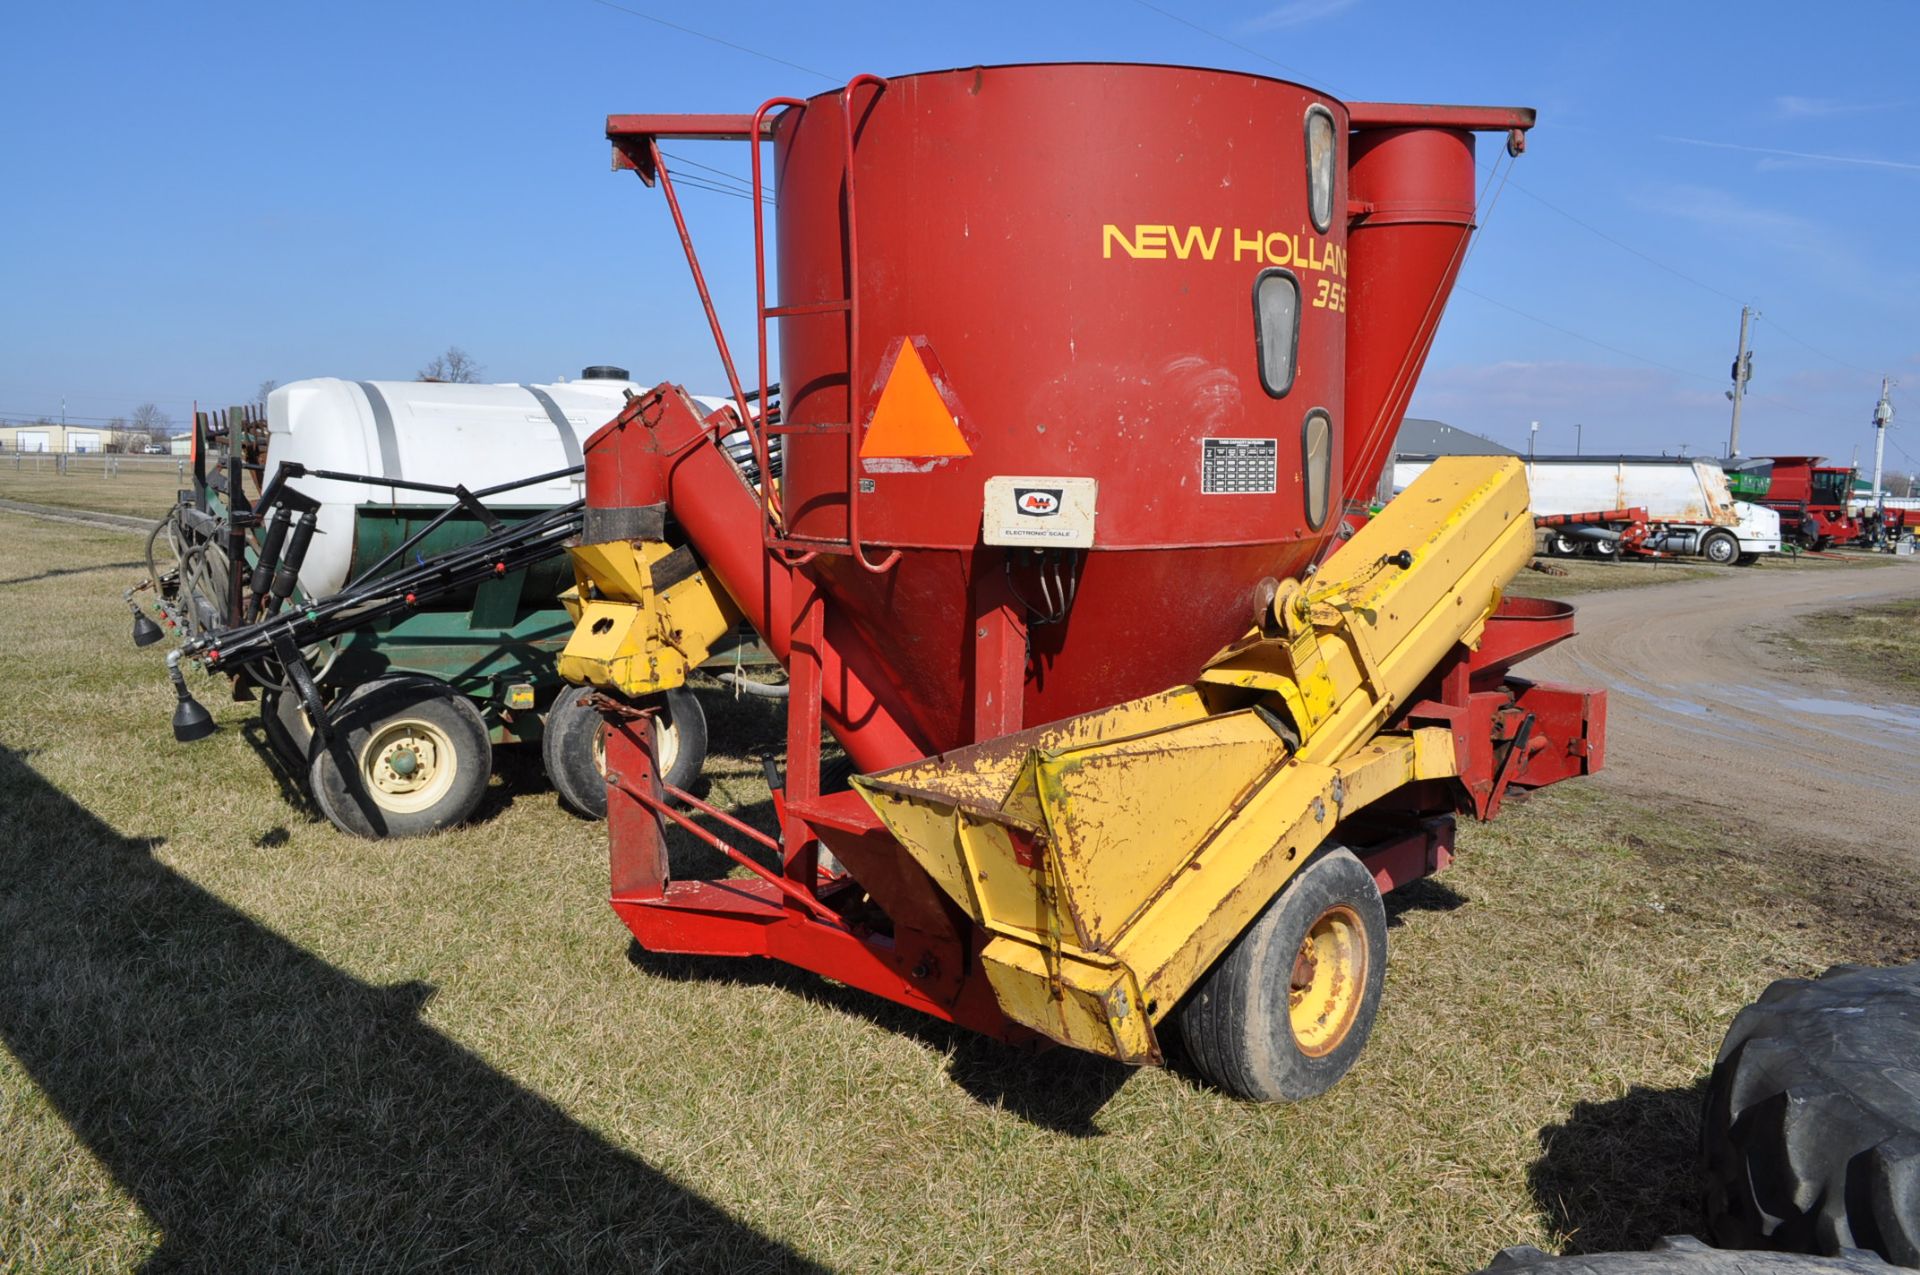 New Holland 355 grinder mixer, load auger, long unload auger, scales need repaired - Image 3 of 9